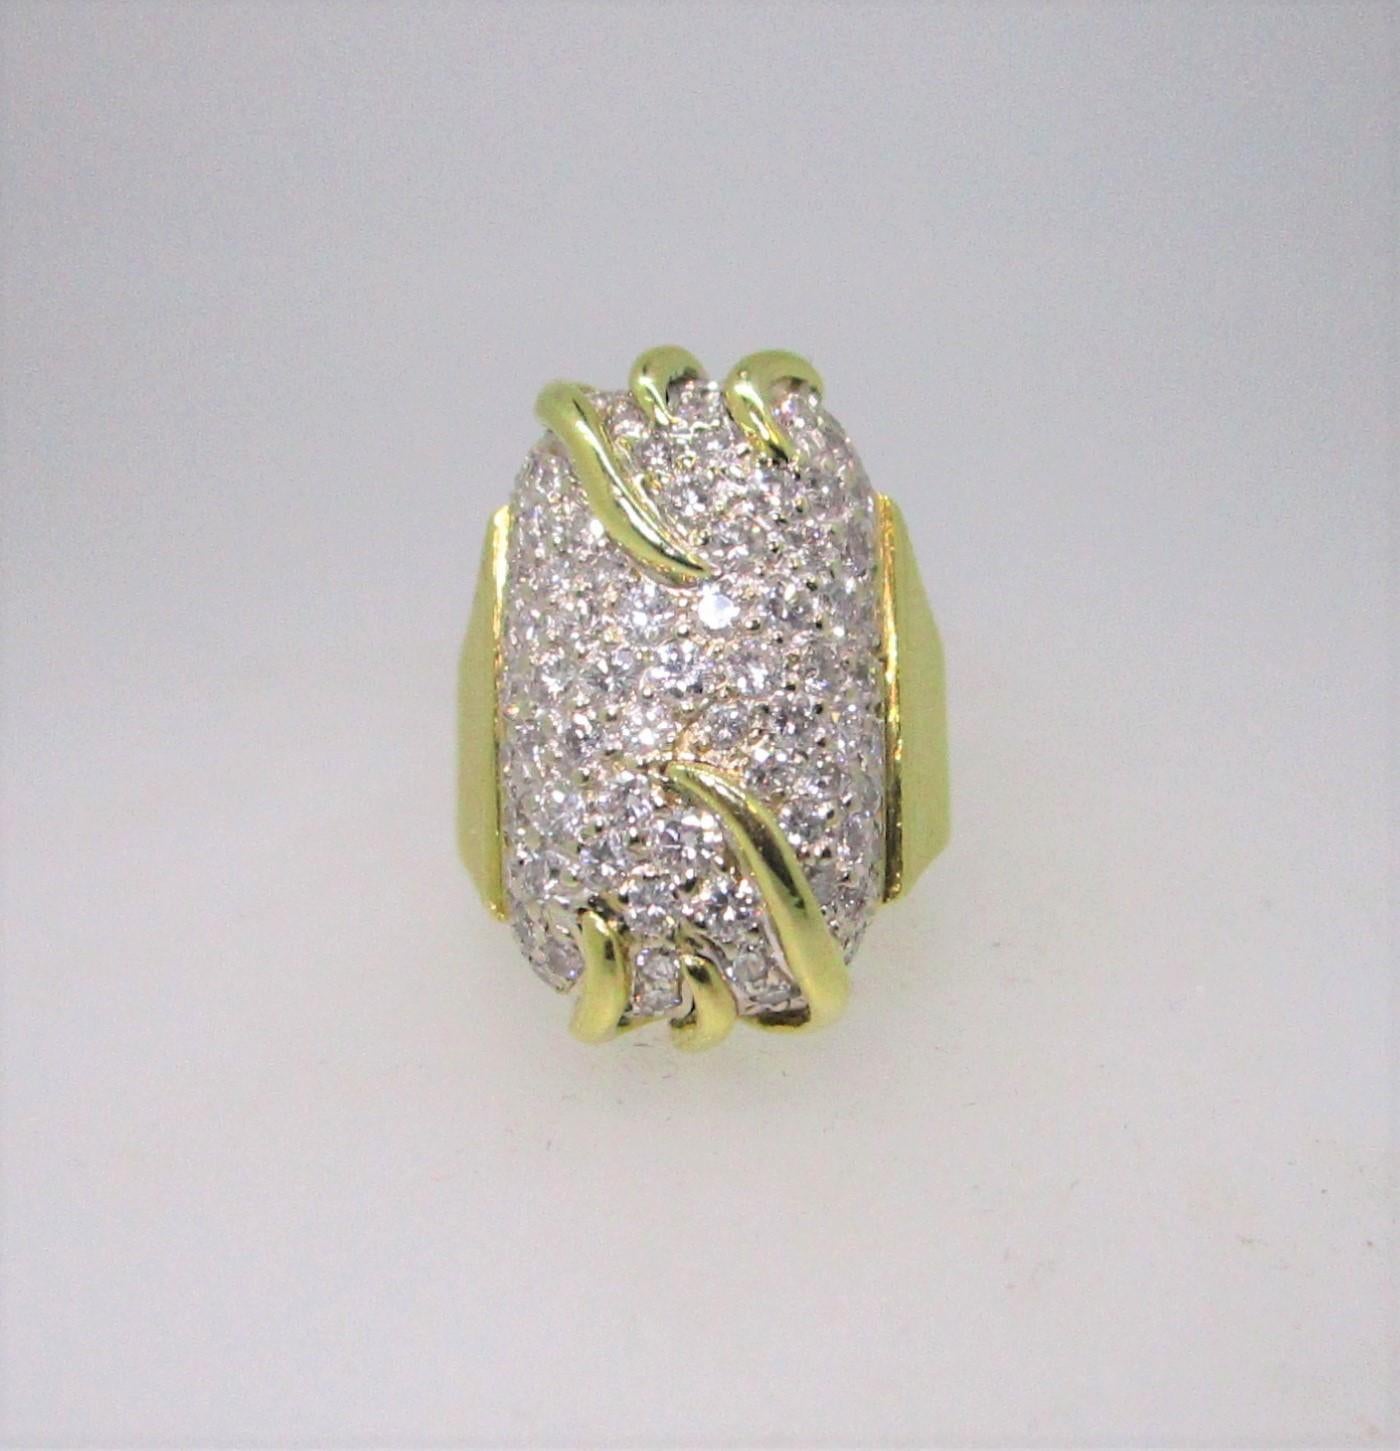 Fabulous Retro look with pave diamonds set in 18 Karat yellow gold. This piece is definitely a show stopper!  Size 5.5